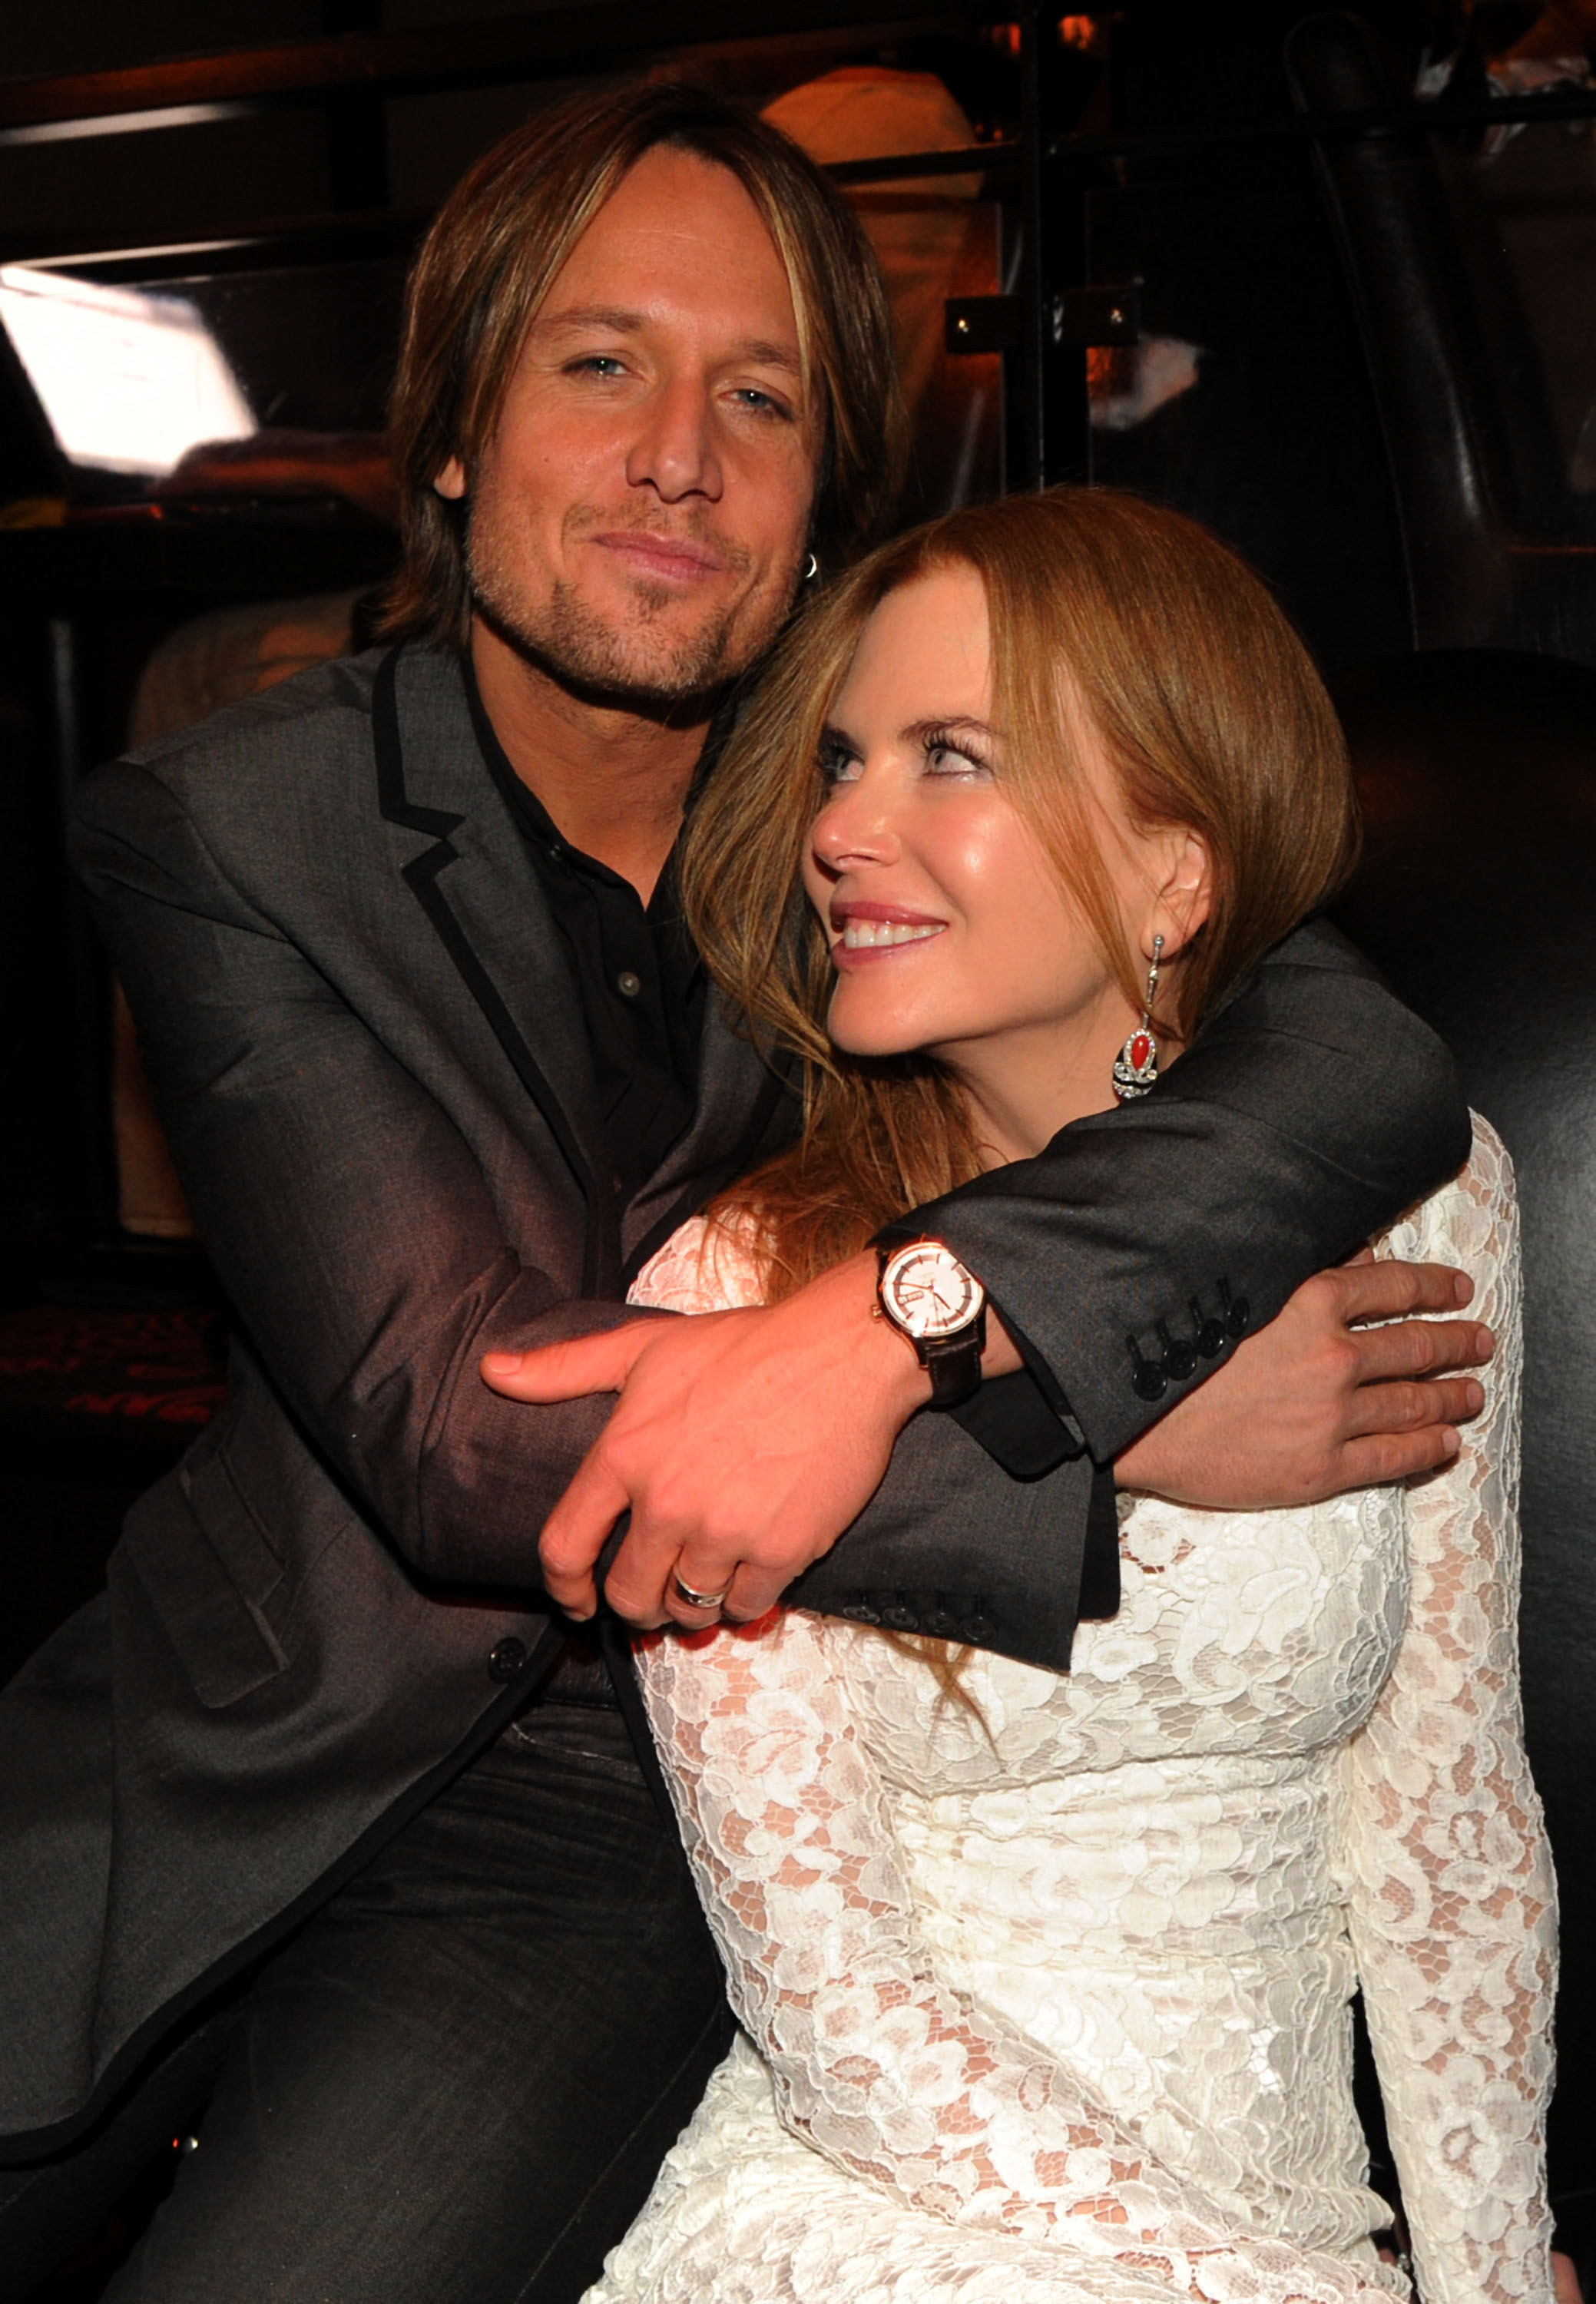 Keith Urban and Nicole Kidman at the 44th Annual CMA Awards - Capitol Records Post Party | Source: Getty Images